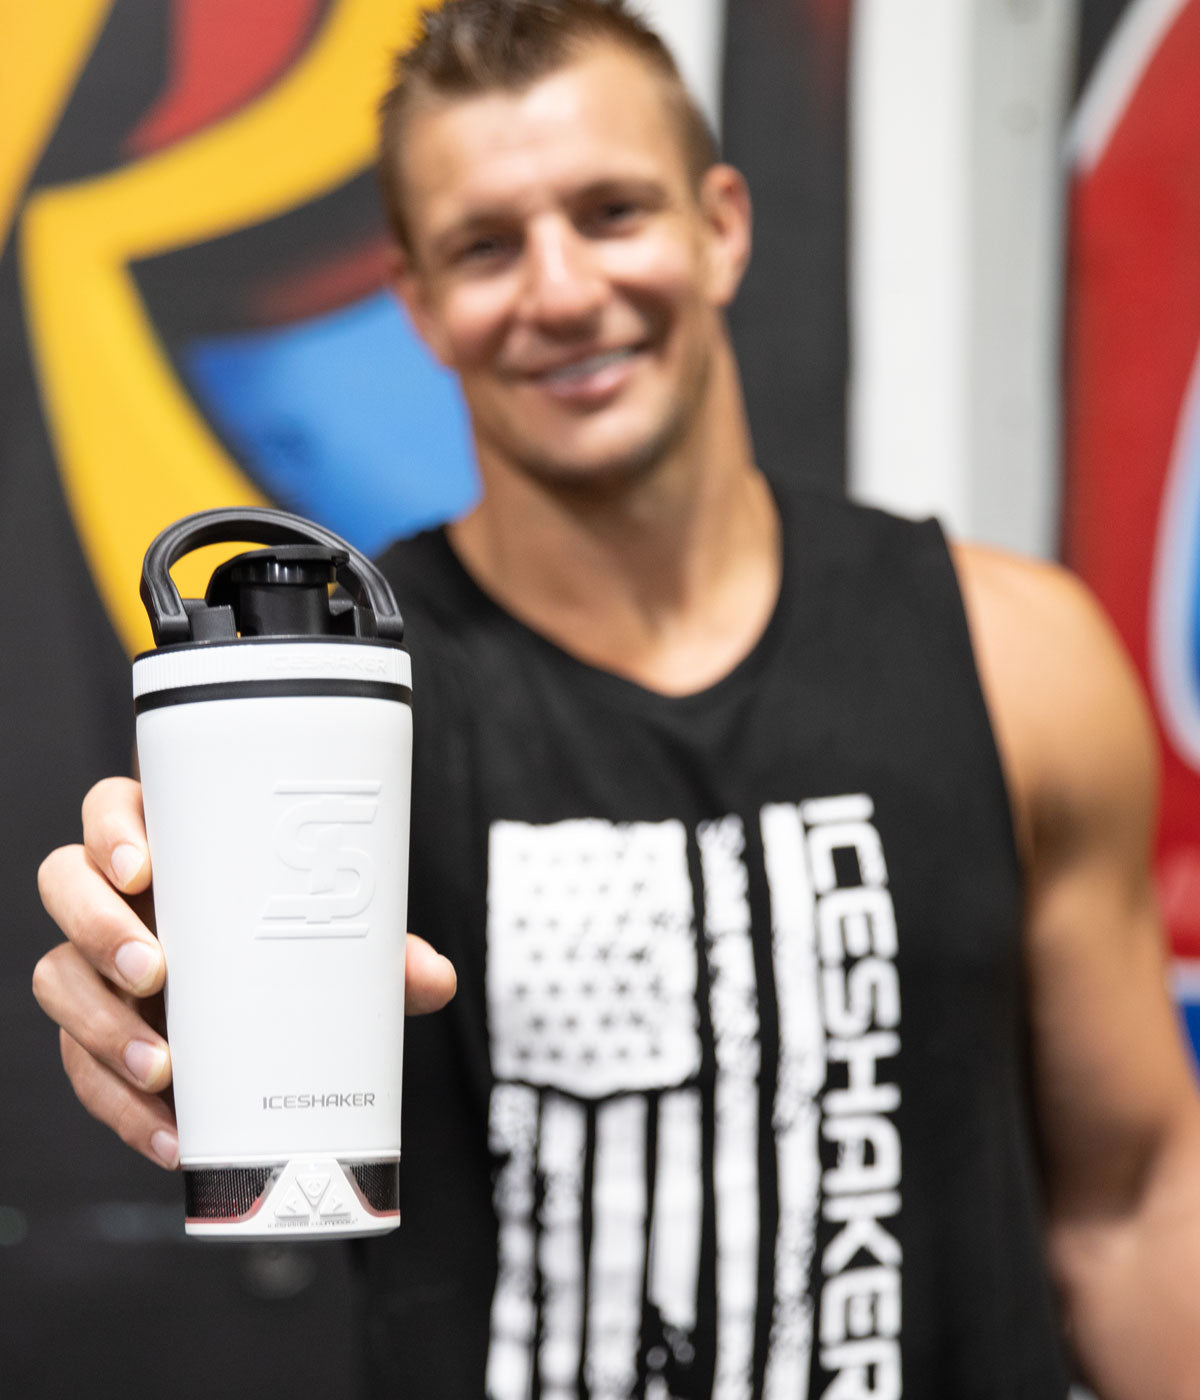 Former NFL Player, Rob Gronkowski has his arm stretch out towards the camera and he is holding a white 20oz Speaker Bottle